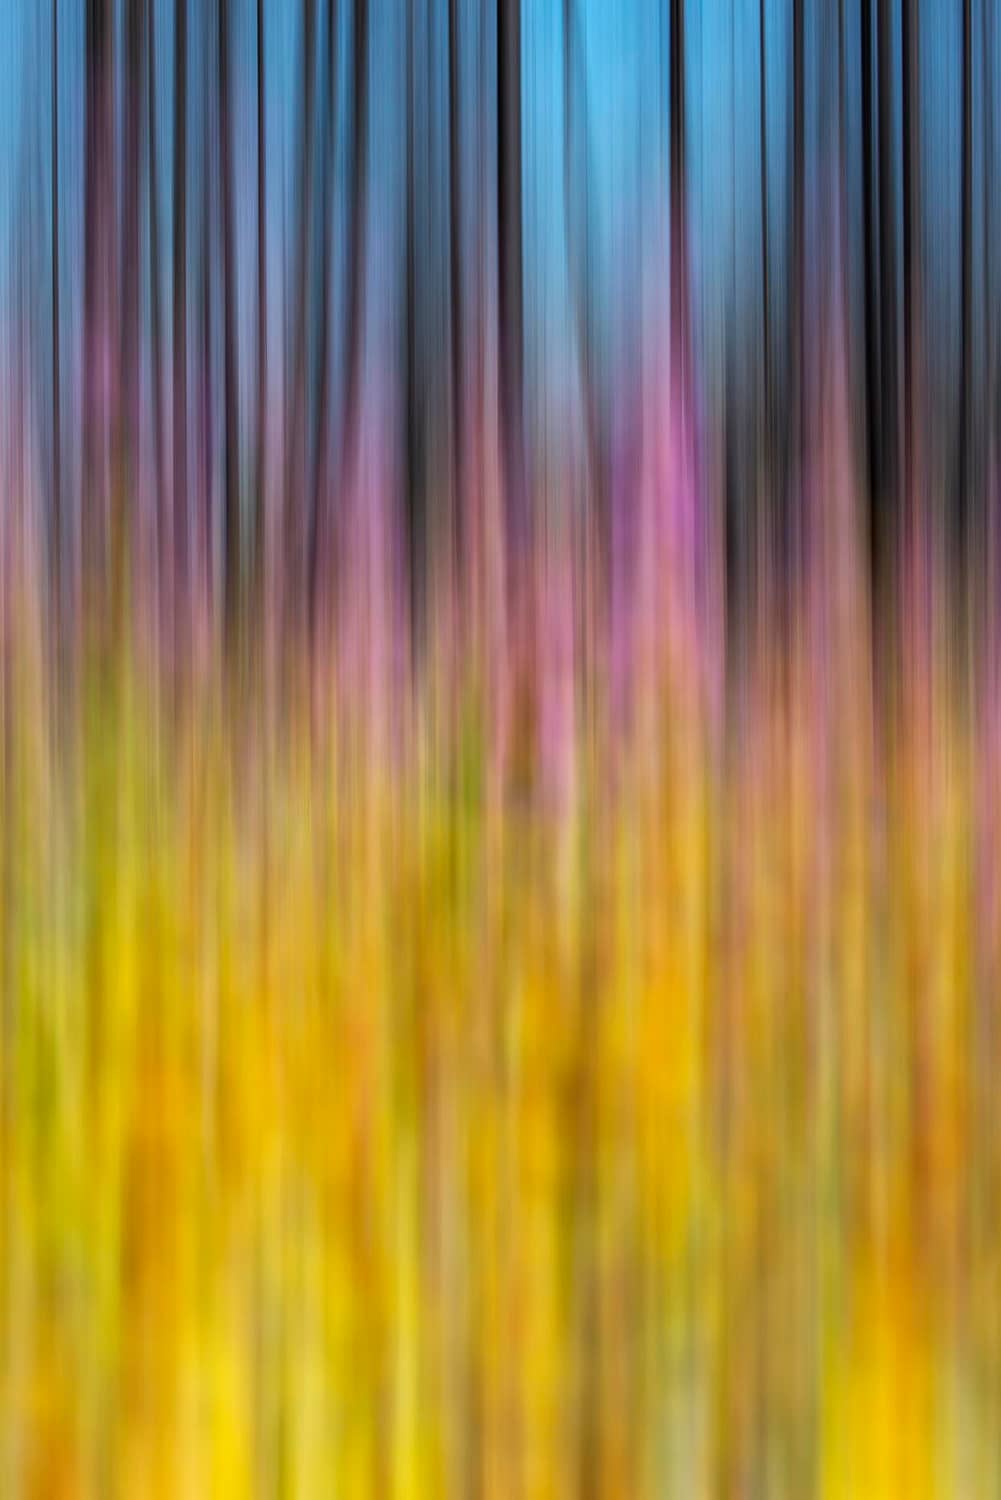 nature abstract of flowers and trees in motion blur